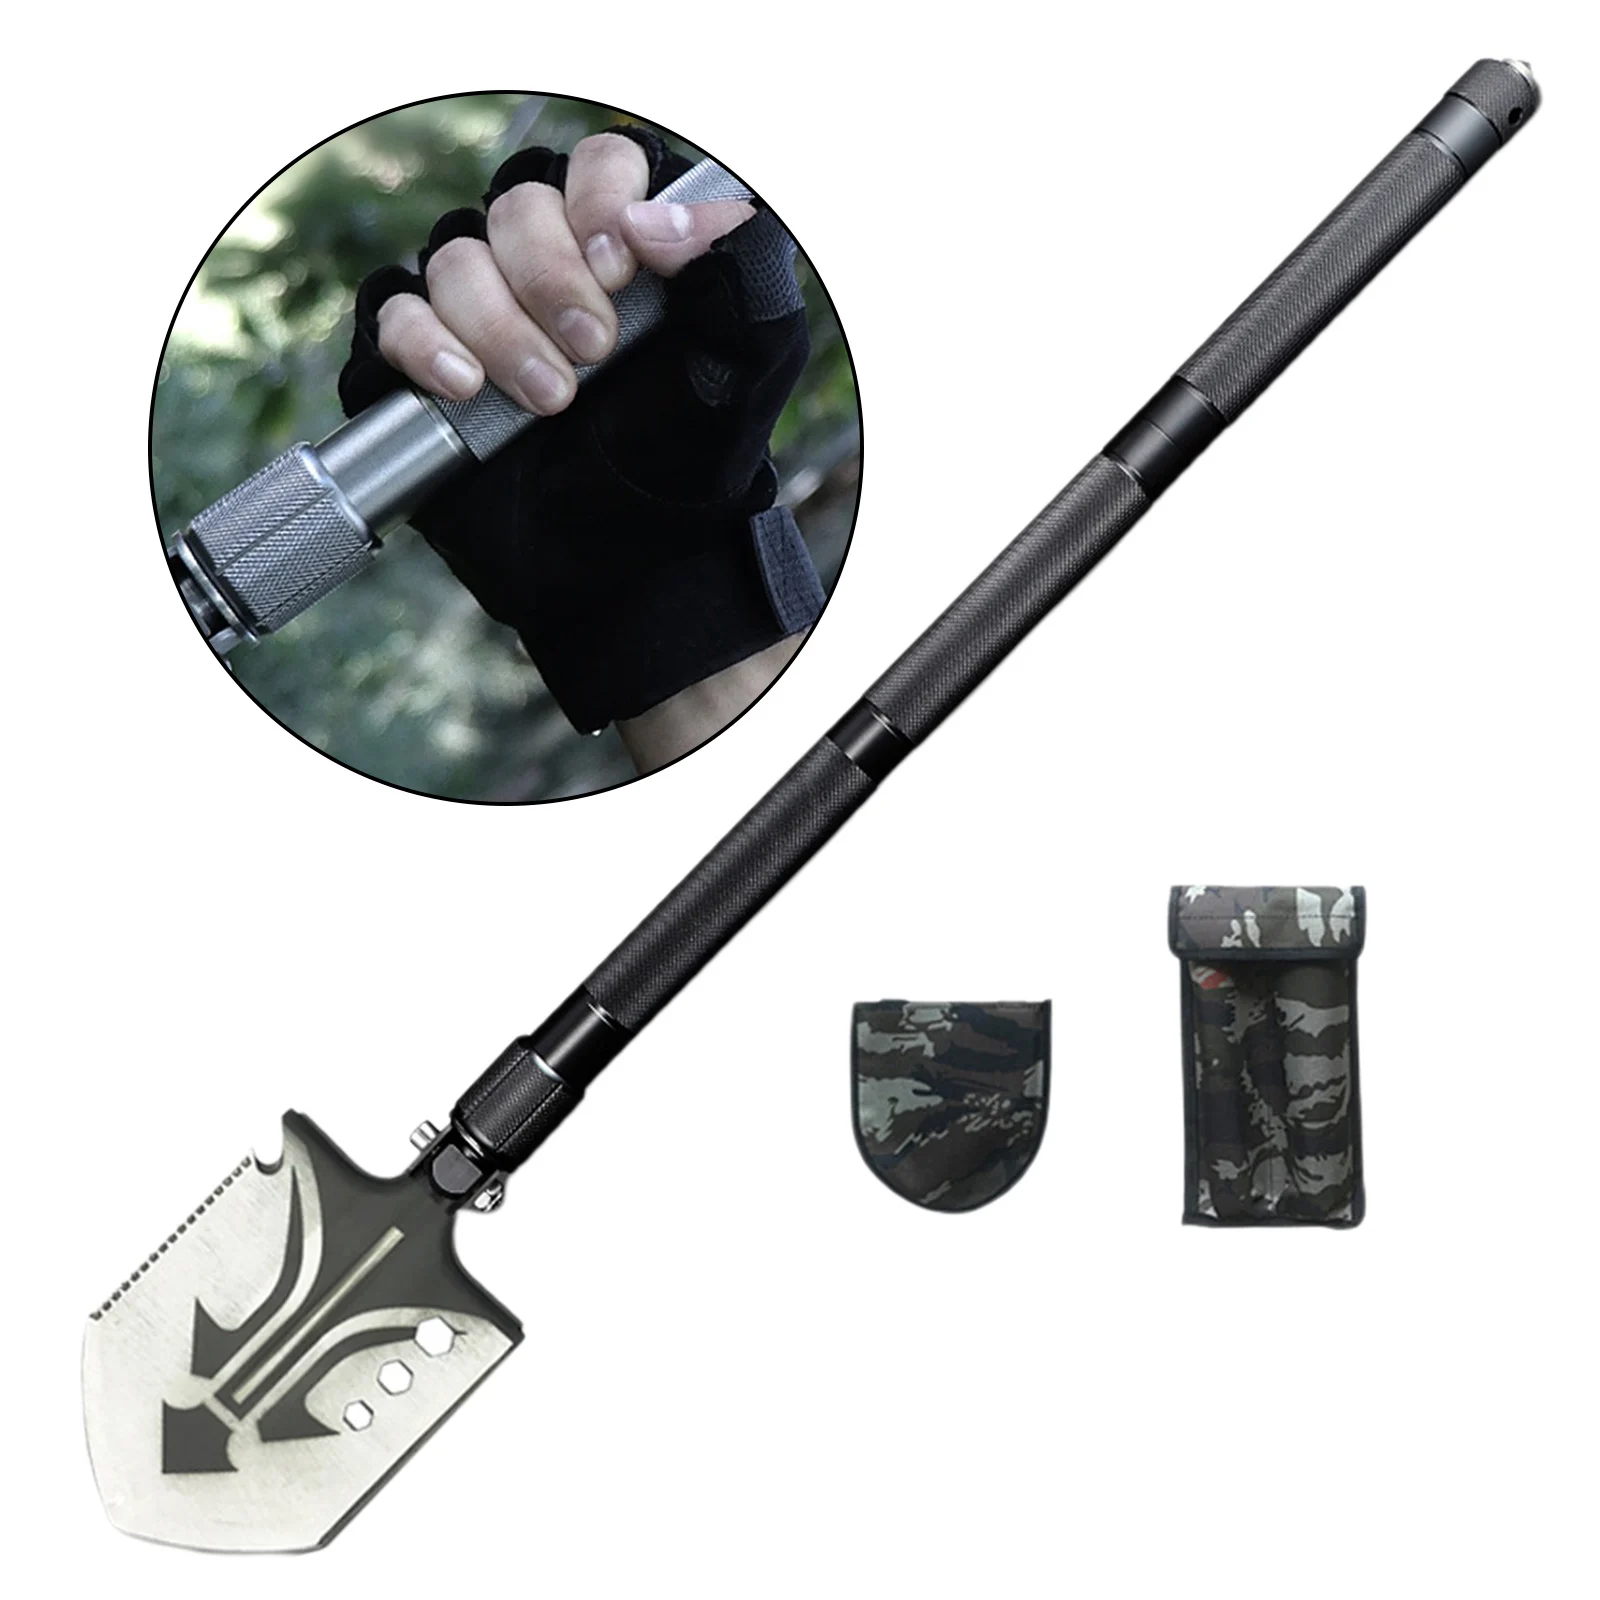 Survival Shovel Axe, Outdoor Survival Pocket Tool Extended Handle Survival Axe, Storage Bag for Camping, Backpacking, Emergency